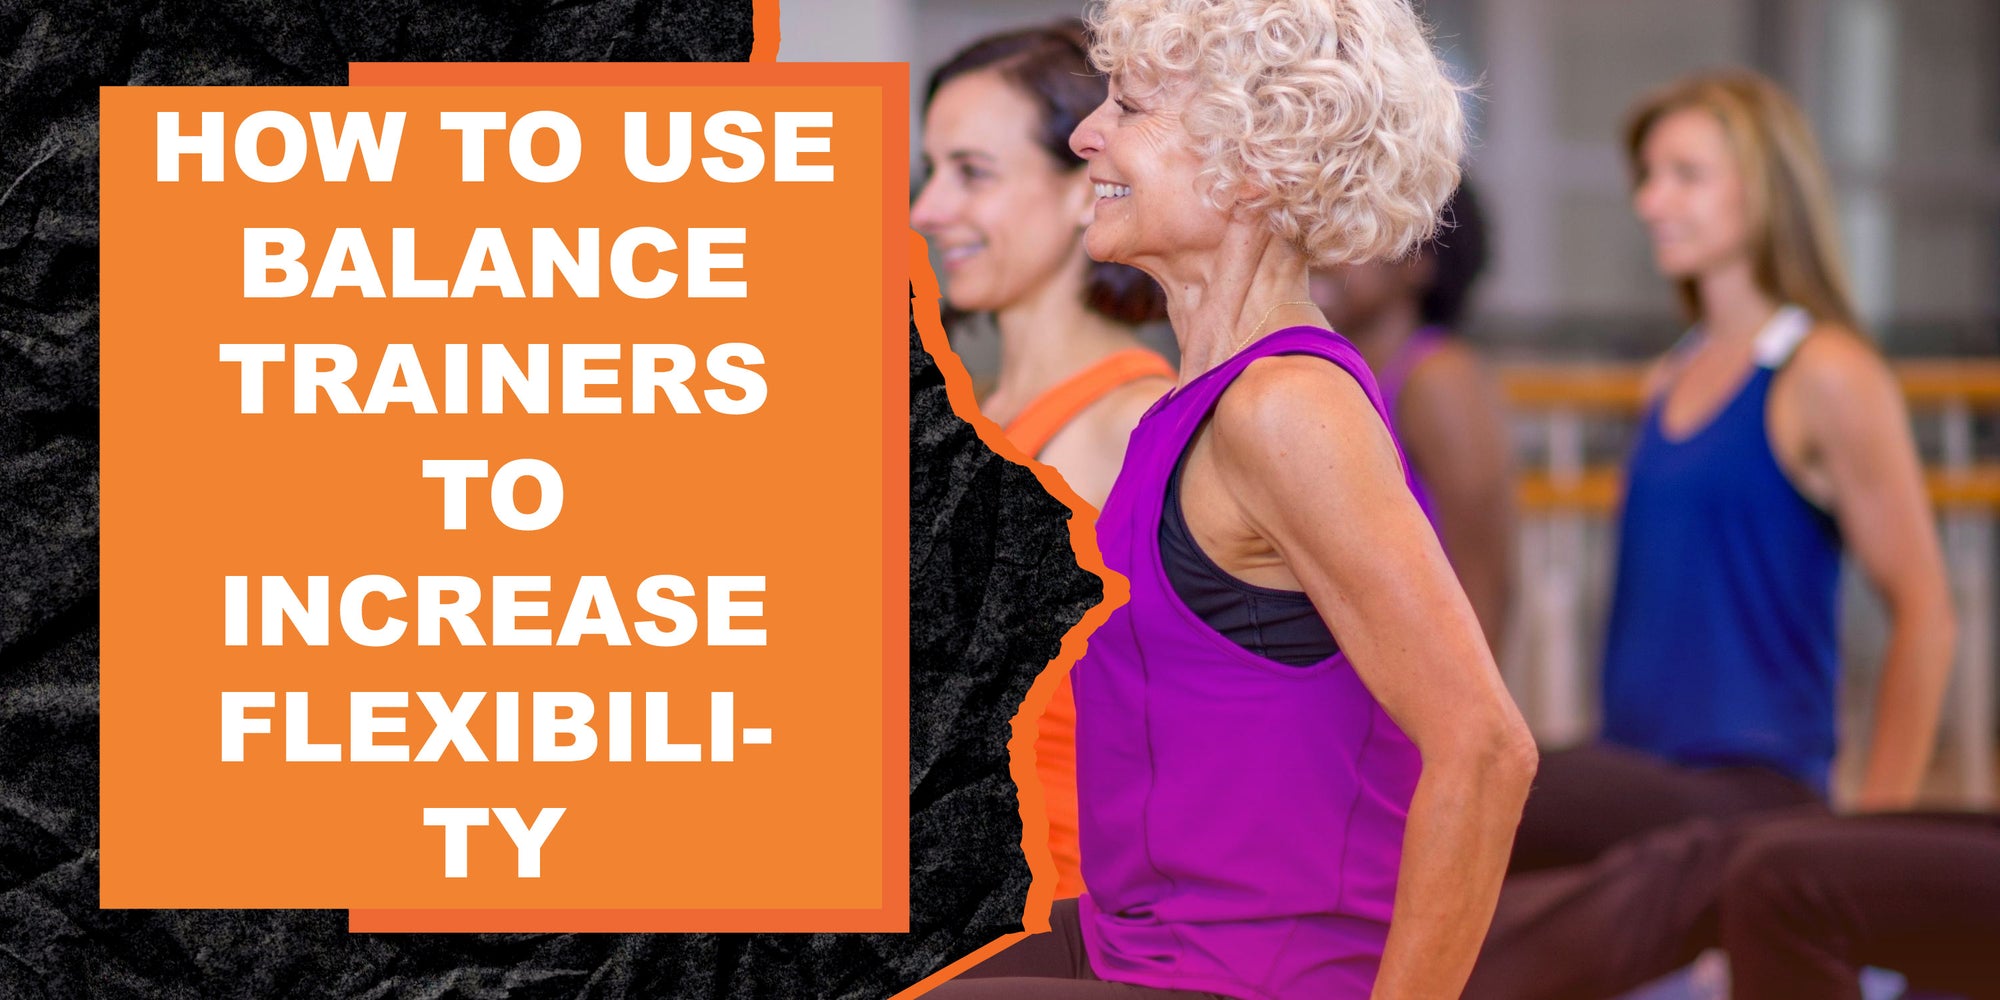 How to Use Balance Trainers to Increase Flexibility